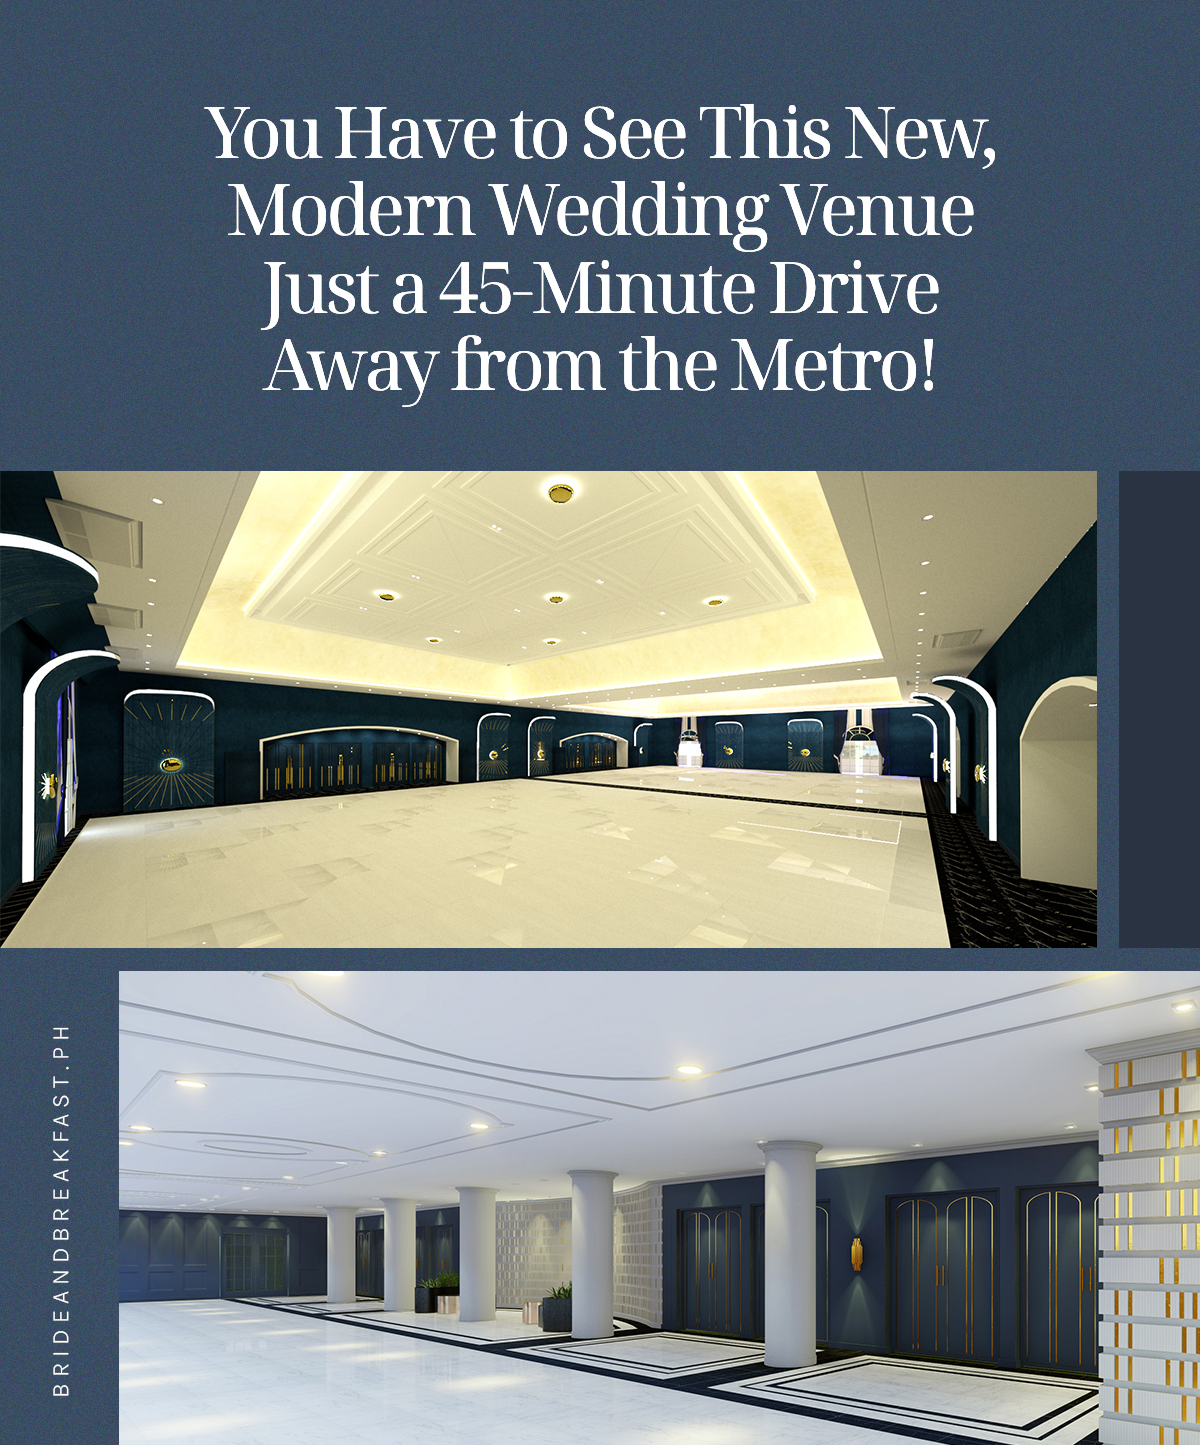 You Have to See This New, Modern Wedding Venue Just a 45-Minute Drive Away from the Metro! 